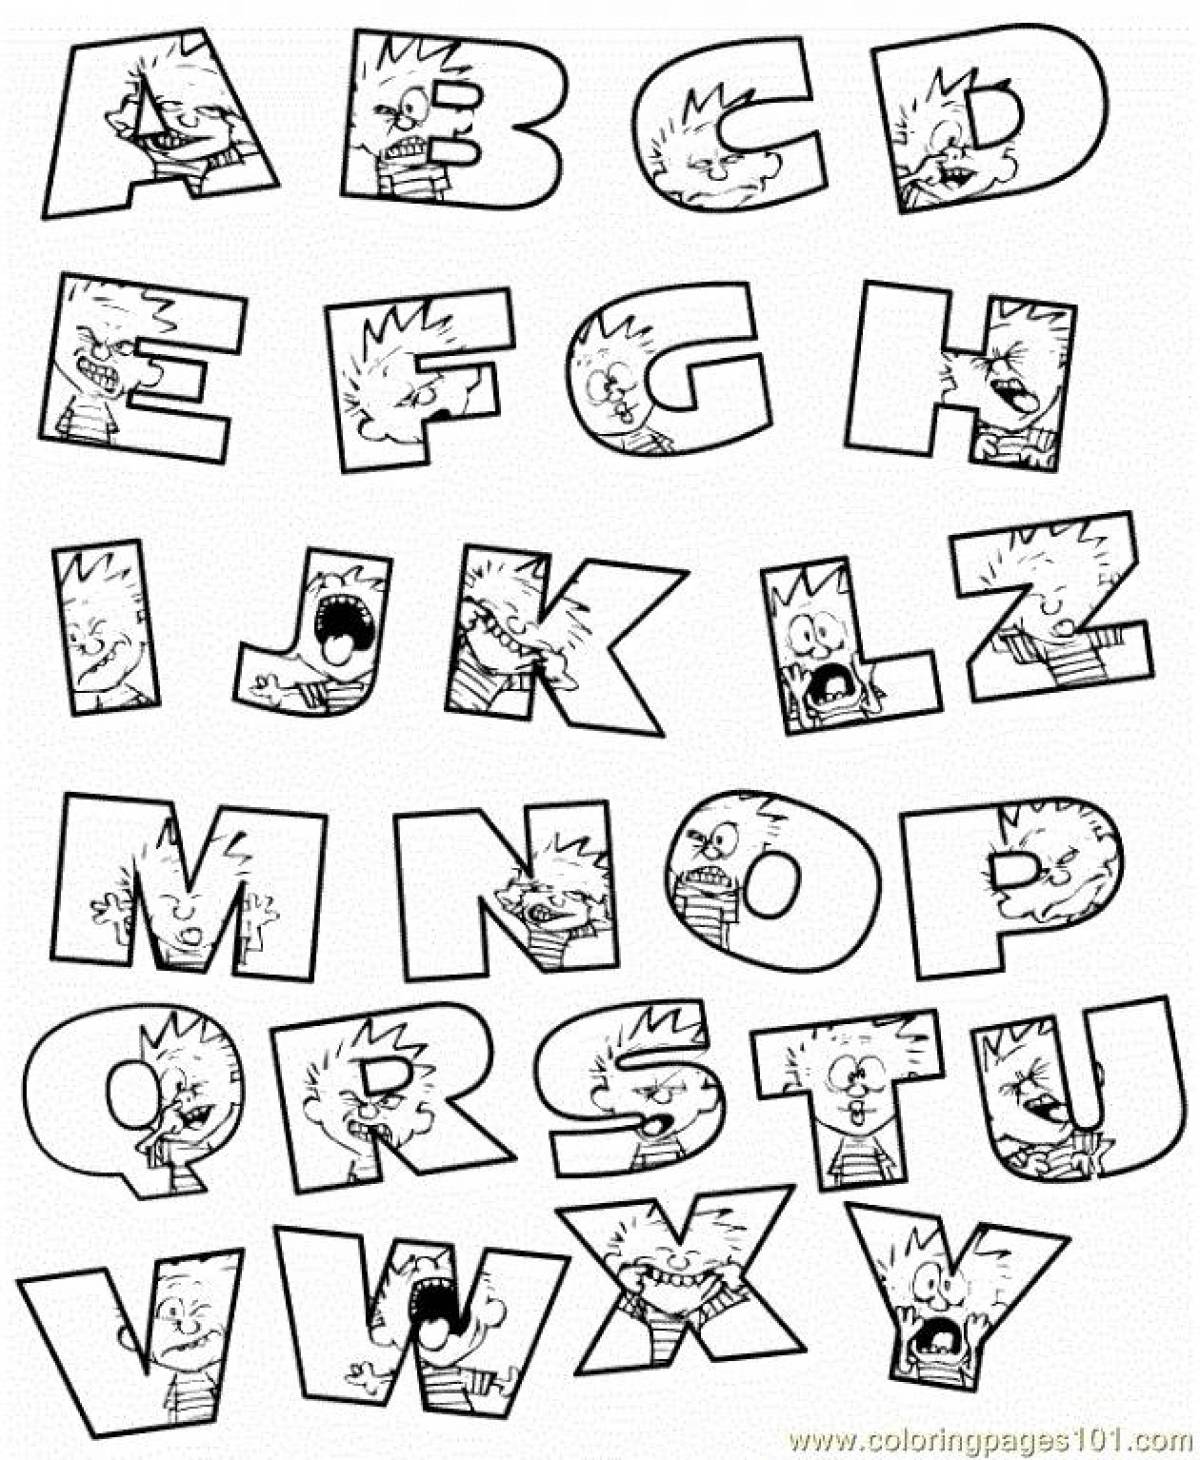 Colorful-wonderful alphabet knowledge coloring page